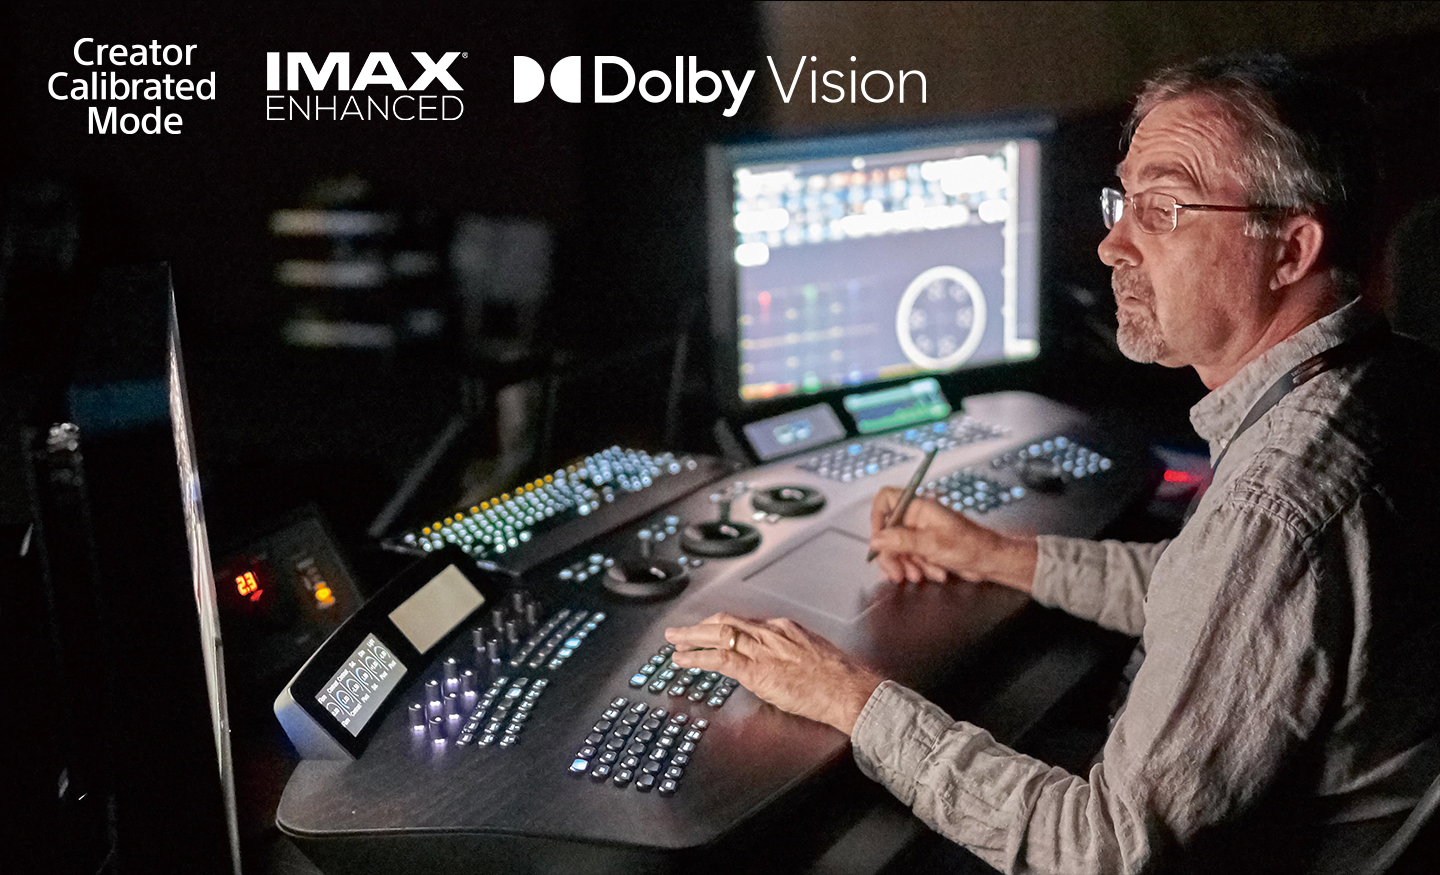 IMAX Enhanced, Dolby Vision, BRAVIA CORE Calibrated mode, and Netflix Adaptive Calibrated Picture Mode